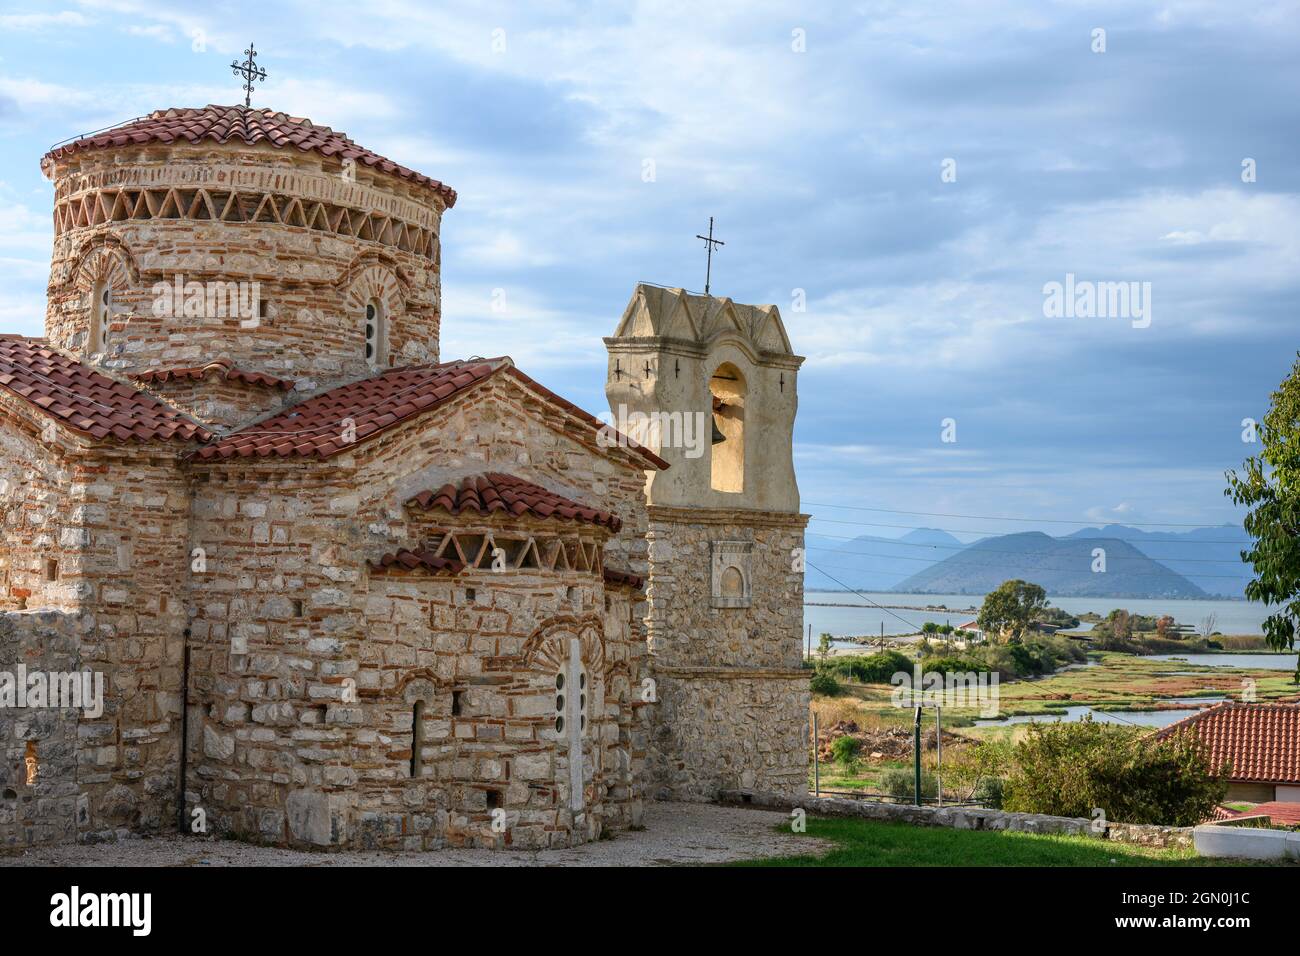 The little 10th cen. Byzantine church of  Panagia Koronisias in the village of Koronisia on Koronisia island with the Ambracian Gulf in the background Stock Photo